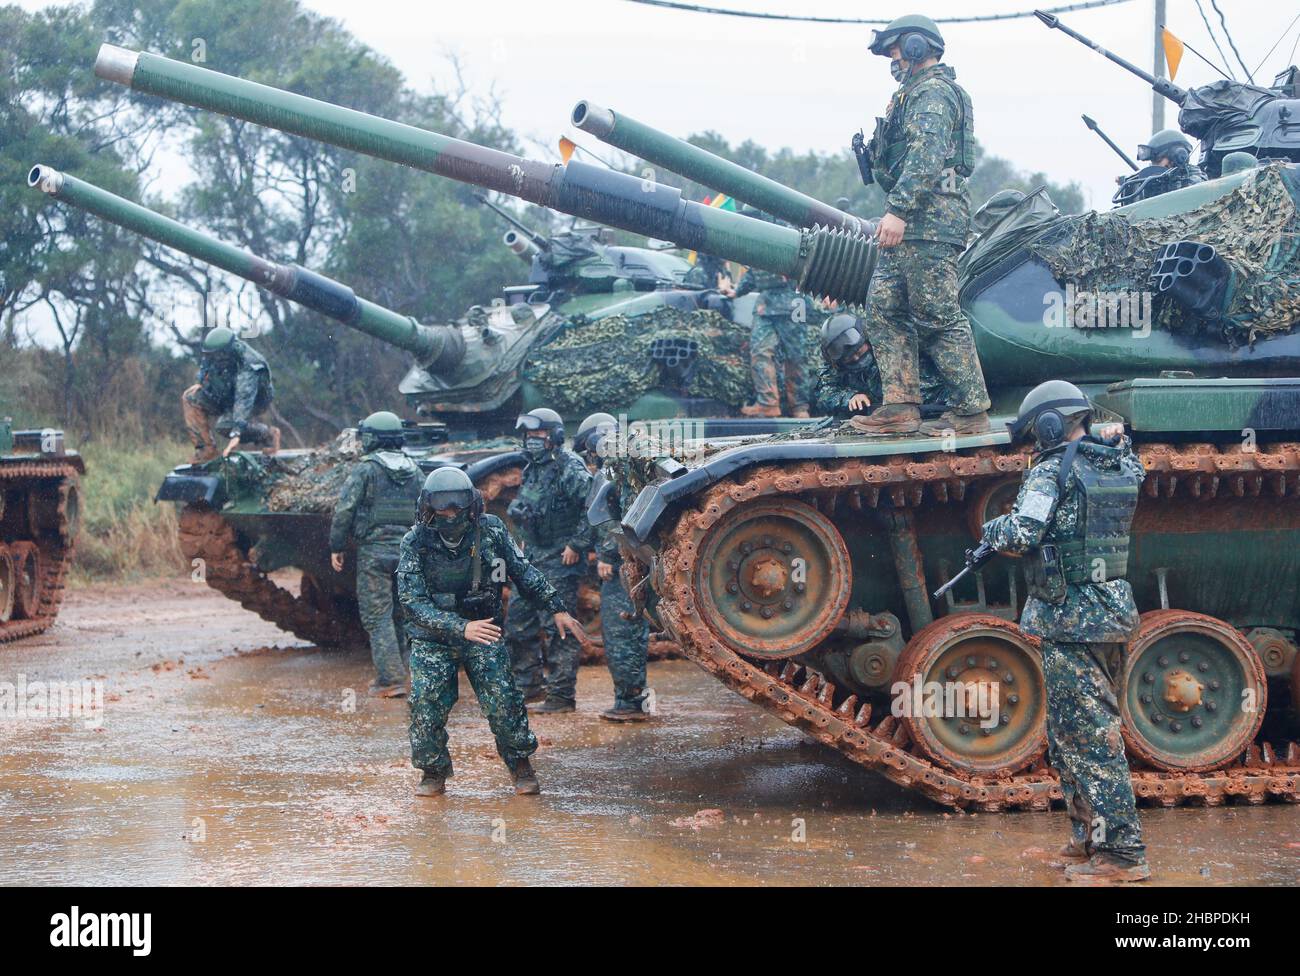 Hsinchu, Taipei, Taiwan. 21st Dec, 2021. Soldiers are seen next to M60-A4 tanks during a live ammunition military drill at an undisclosed location, amid rising tensions with China. Taiwan has been facing intensifying military threats from China including Chinese PLA warplanes sent to cruise around the island, while the US has been offering more arm sales to Taiwan. (Credit Image: © Daniel Ceng Shou-Yi/ZUMA Press Wire) Stock Photo